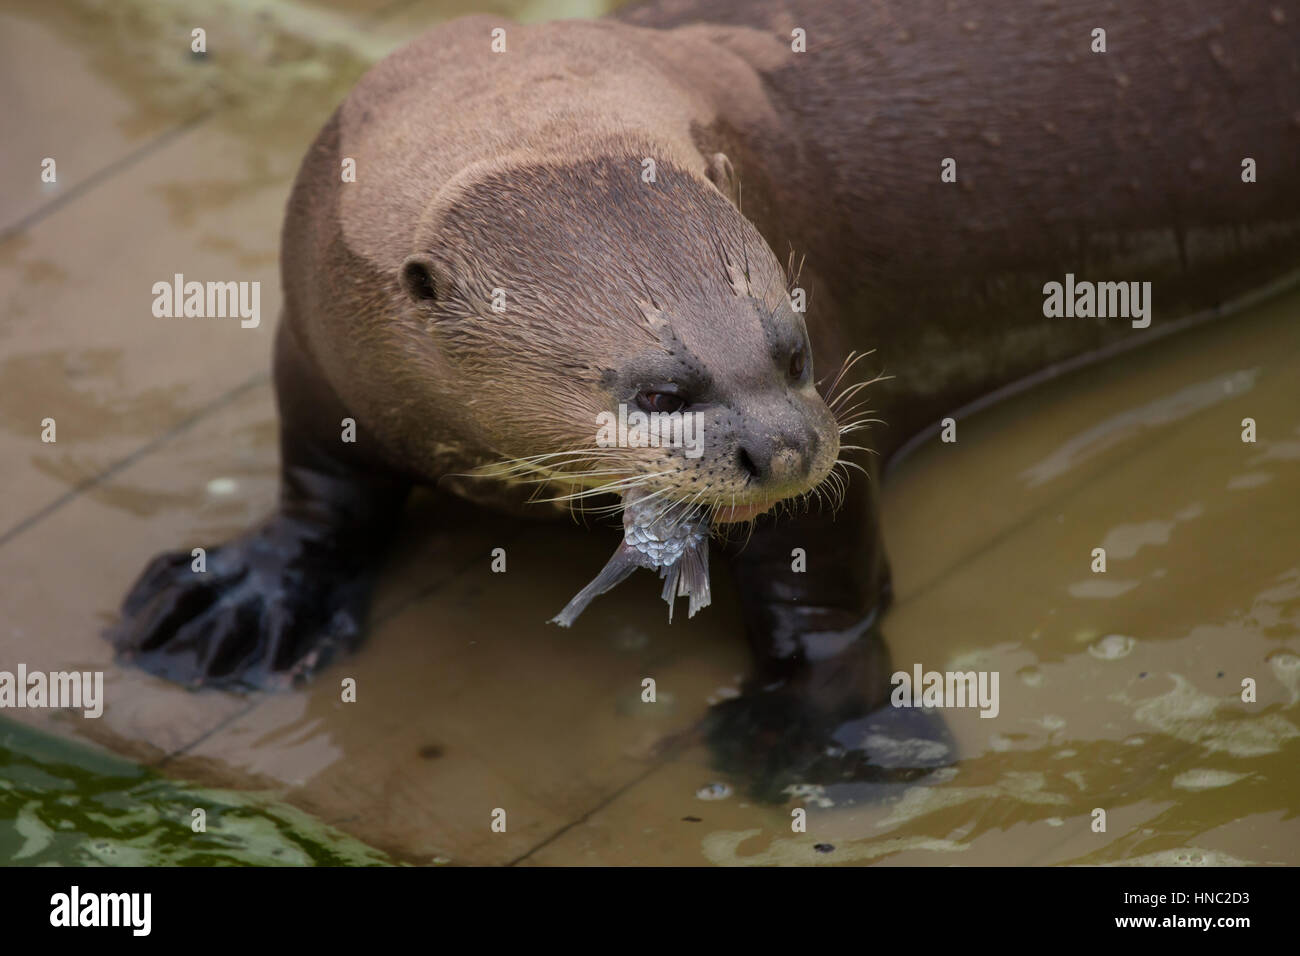 Giant otter (Pteronura brasiliensis), also known as the giant river otter. Stock Photo